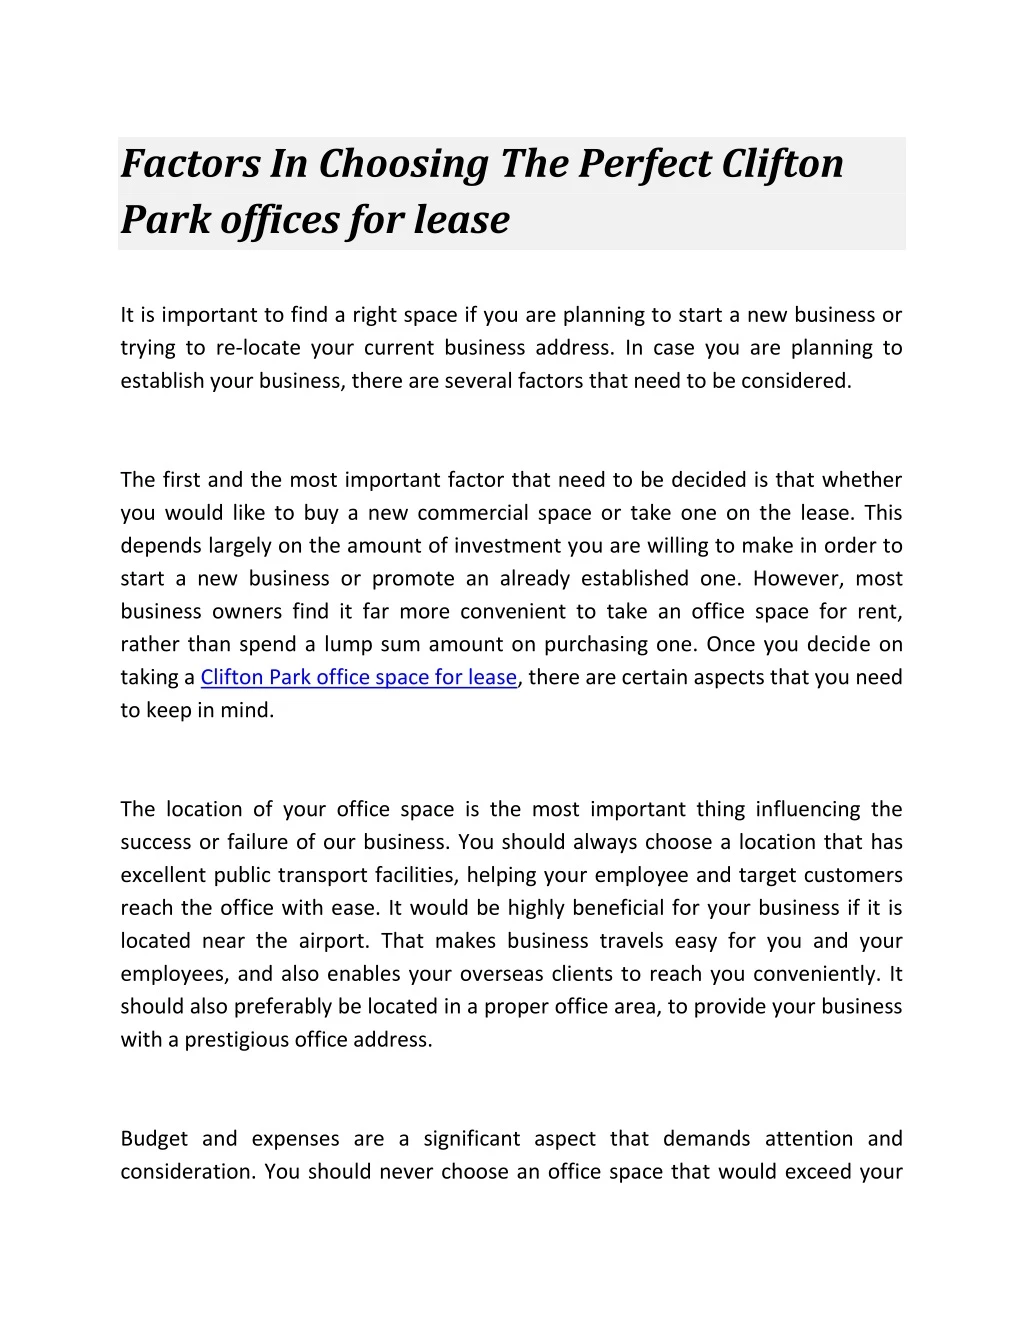 factors in choosing the perfect clifton park